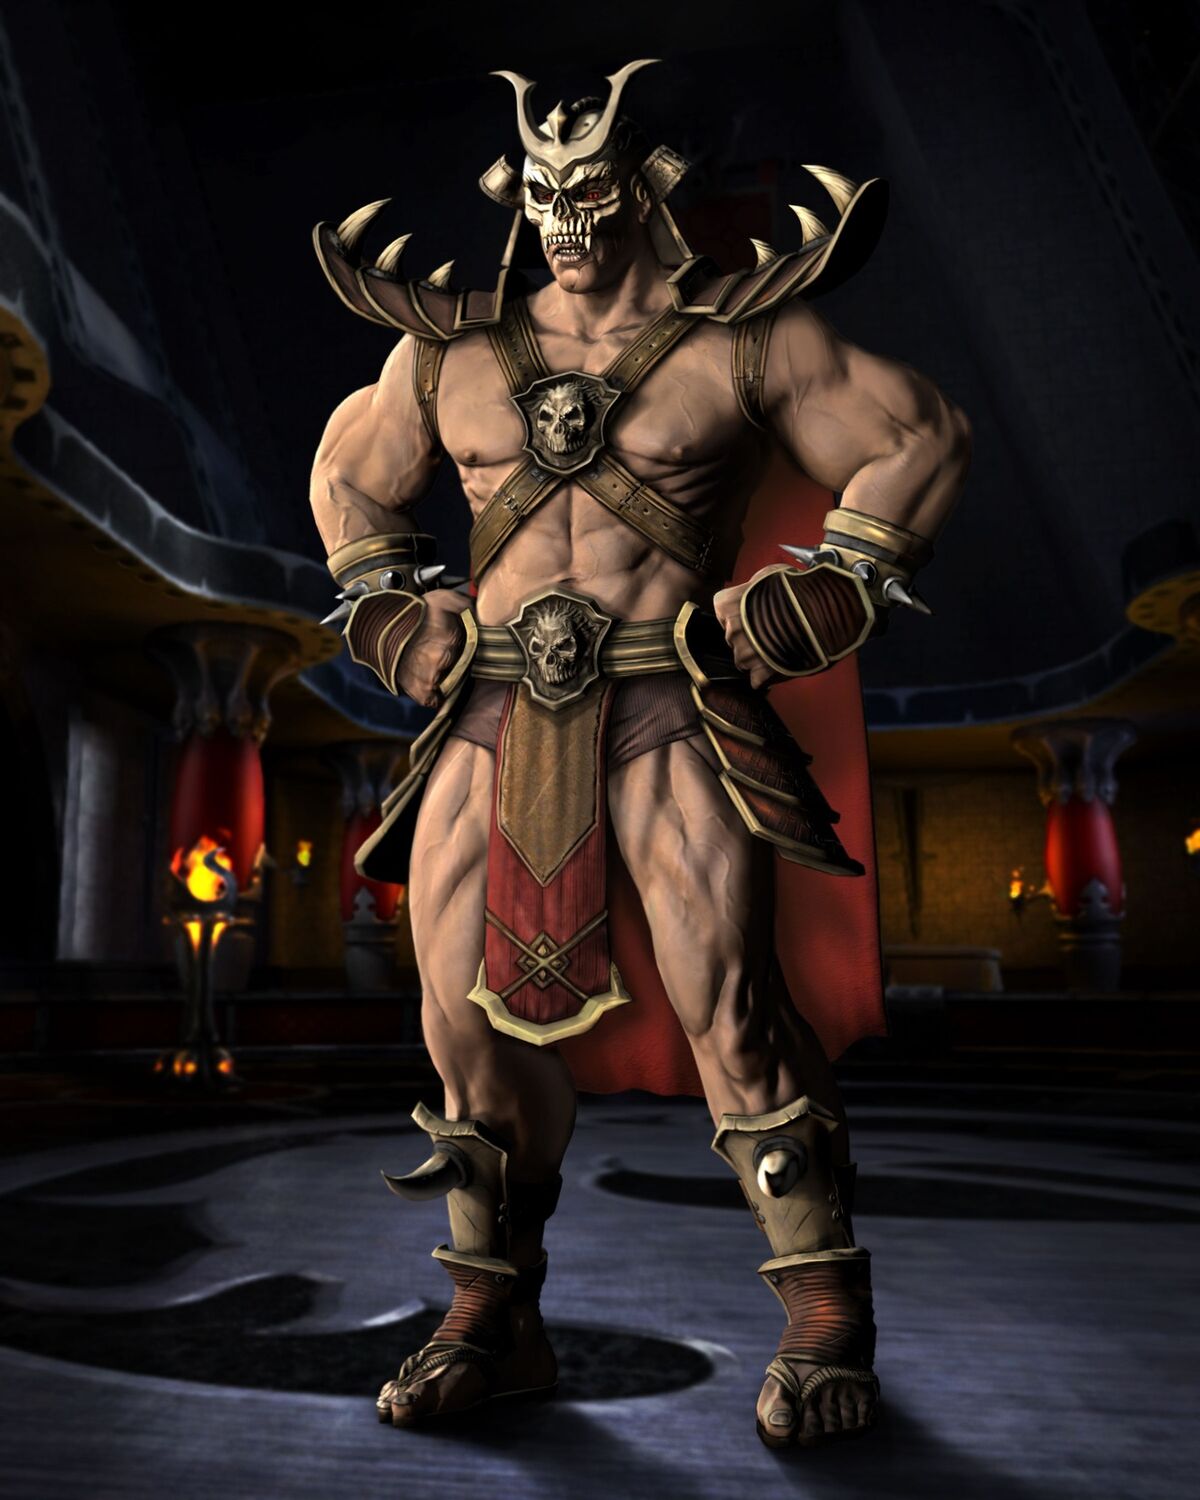 is Shao Kahn like a Highlander? Who did he have sex with in the Earth  realm?